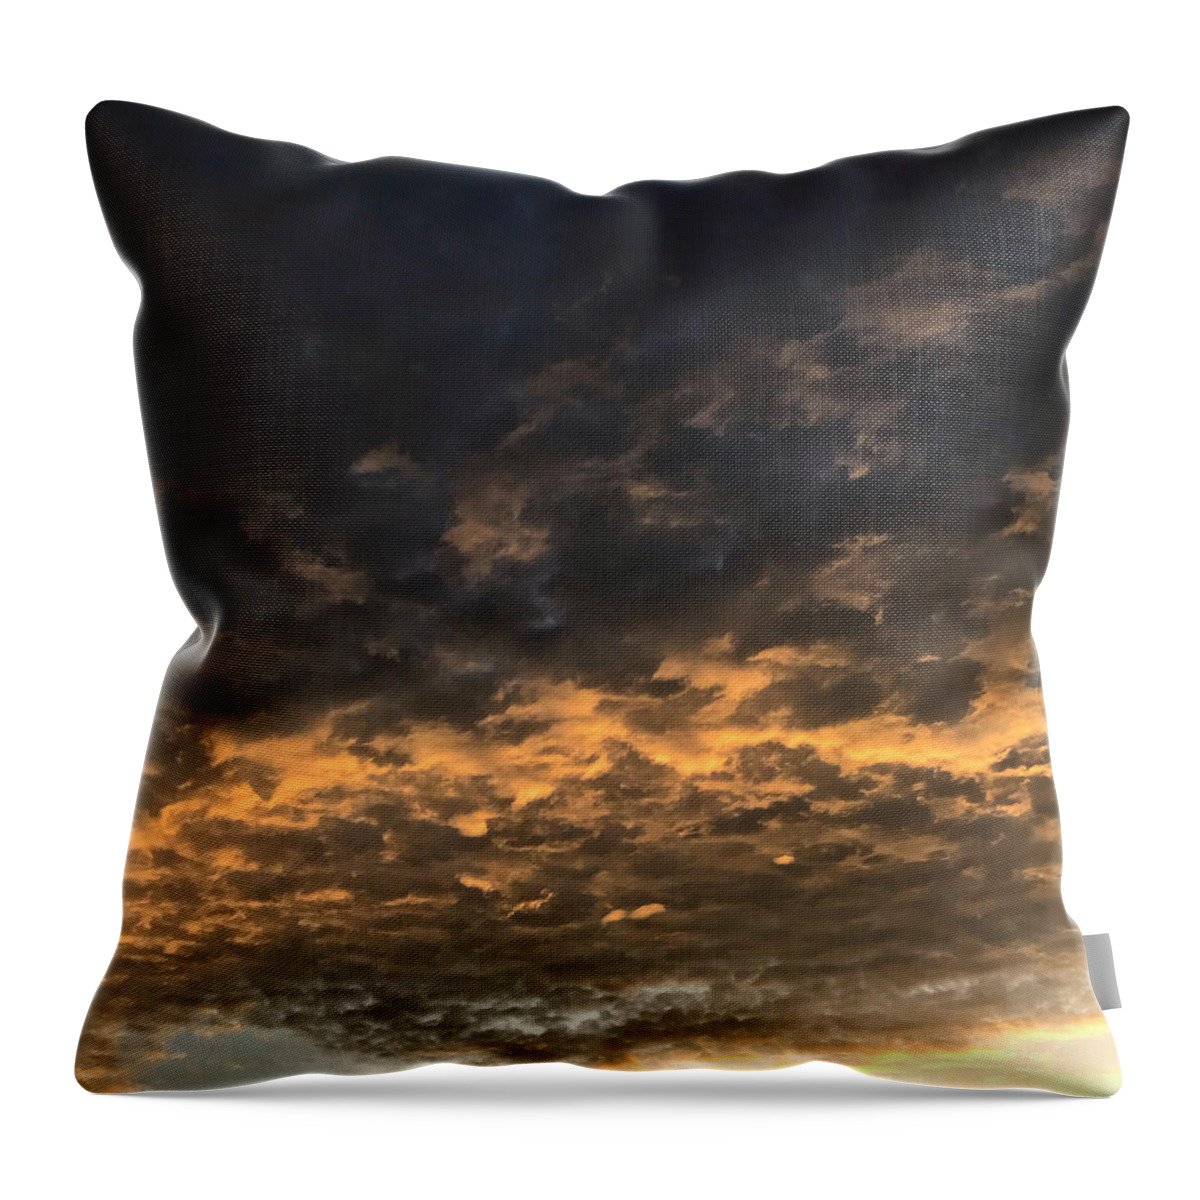  Throw Pillow featuring the photograph Texas Storm Clouds by Jose Machin